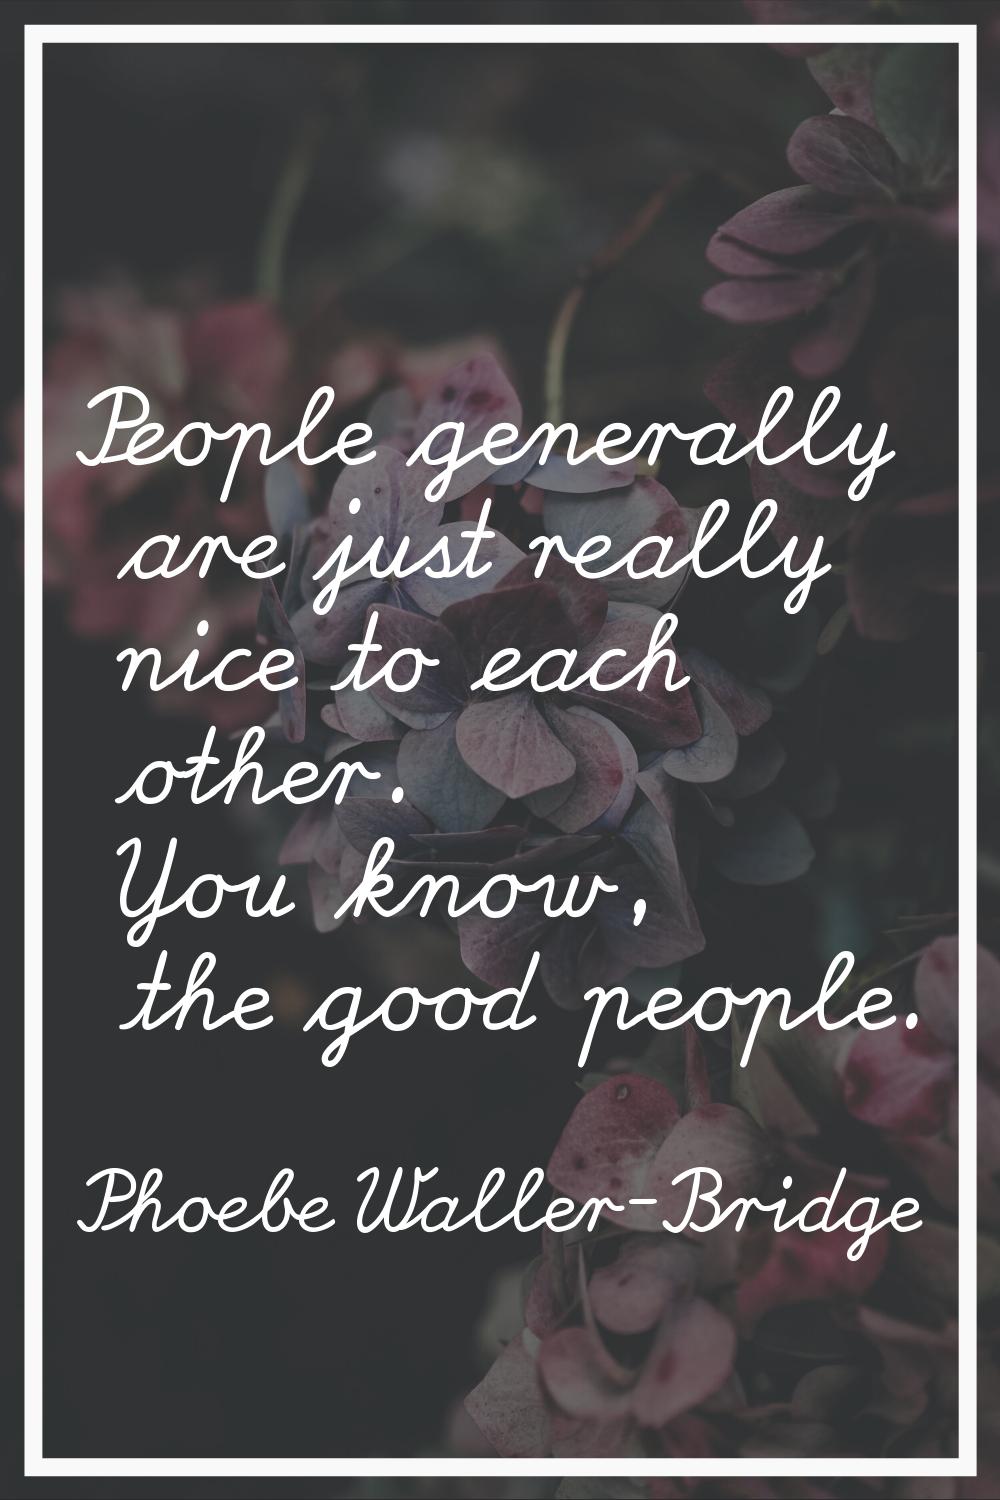 People generally are just really nice to each other. You know, the good people.